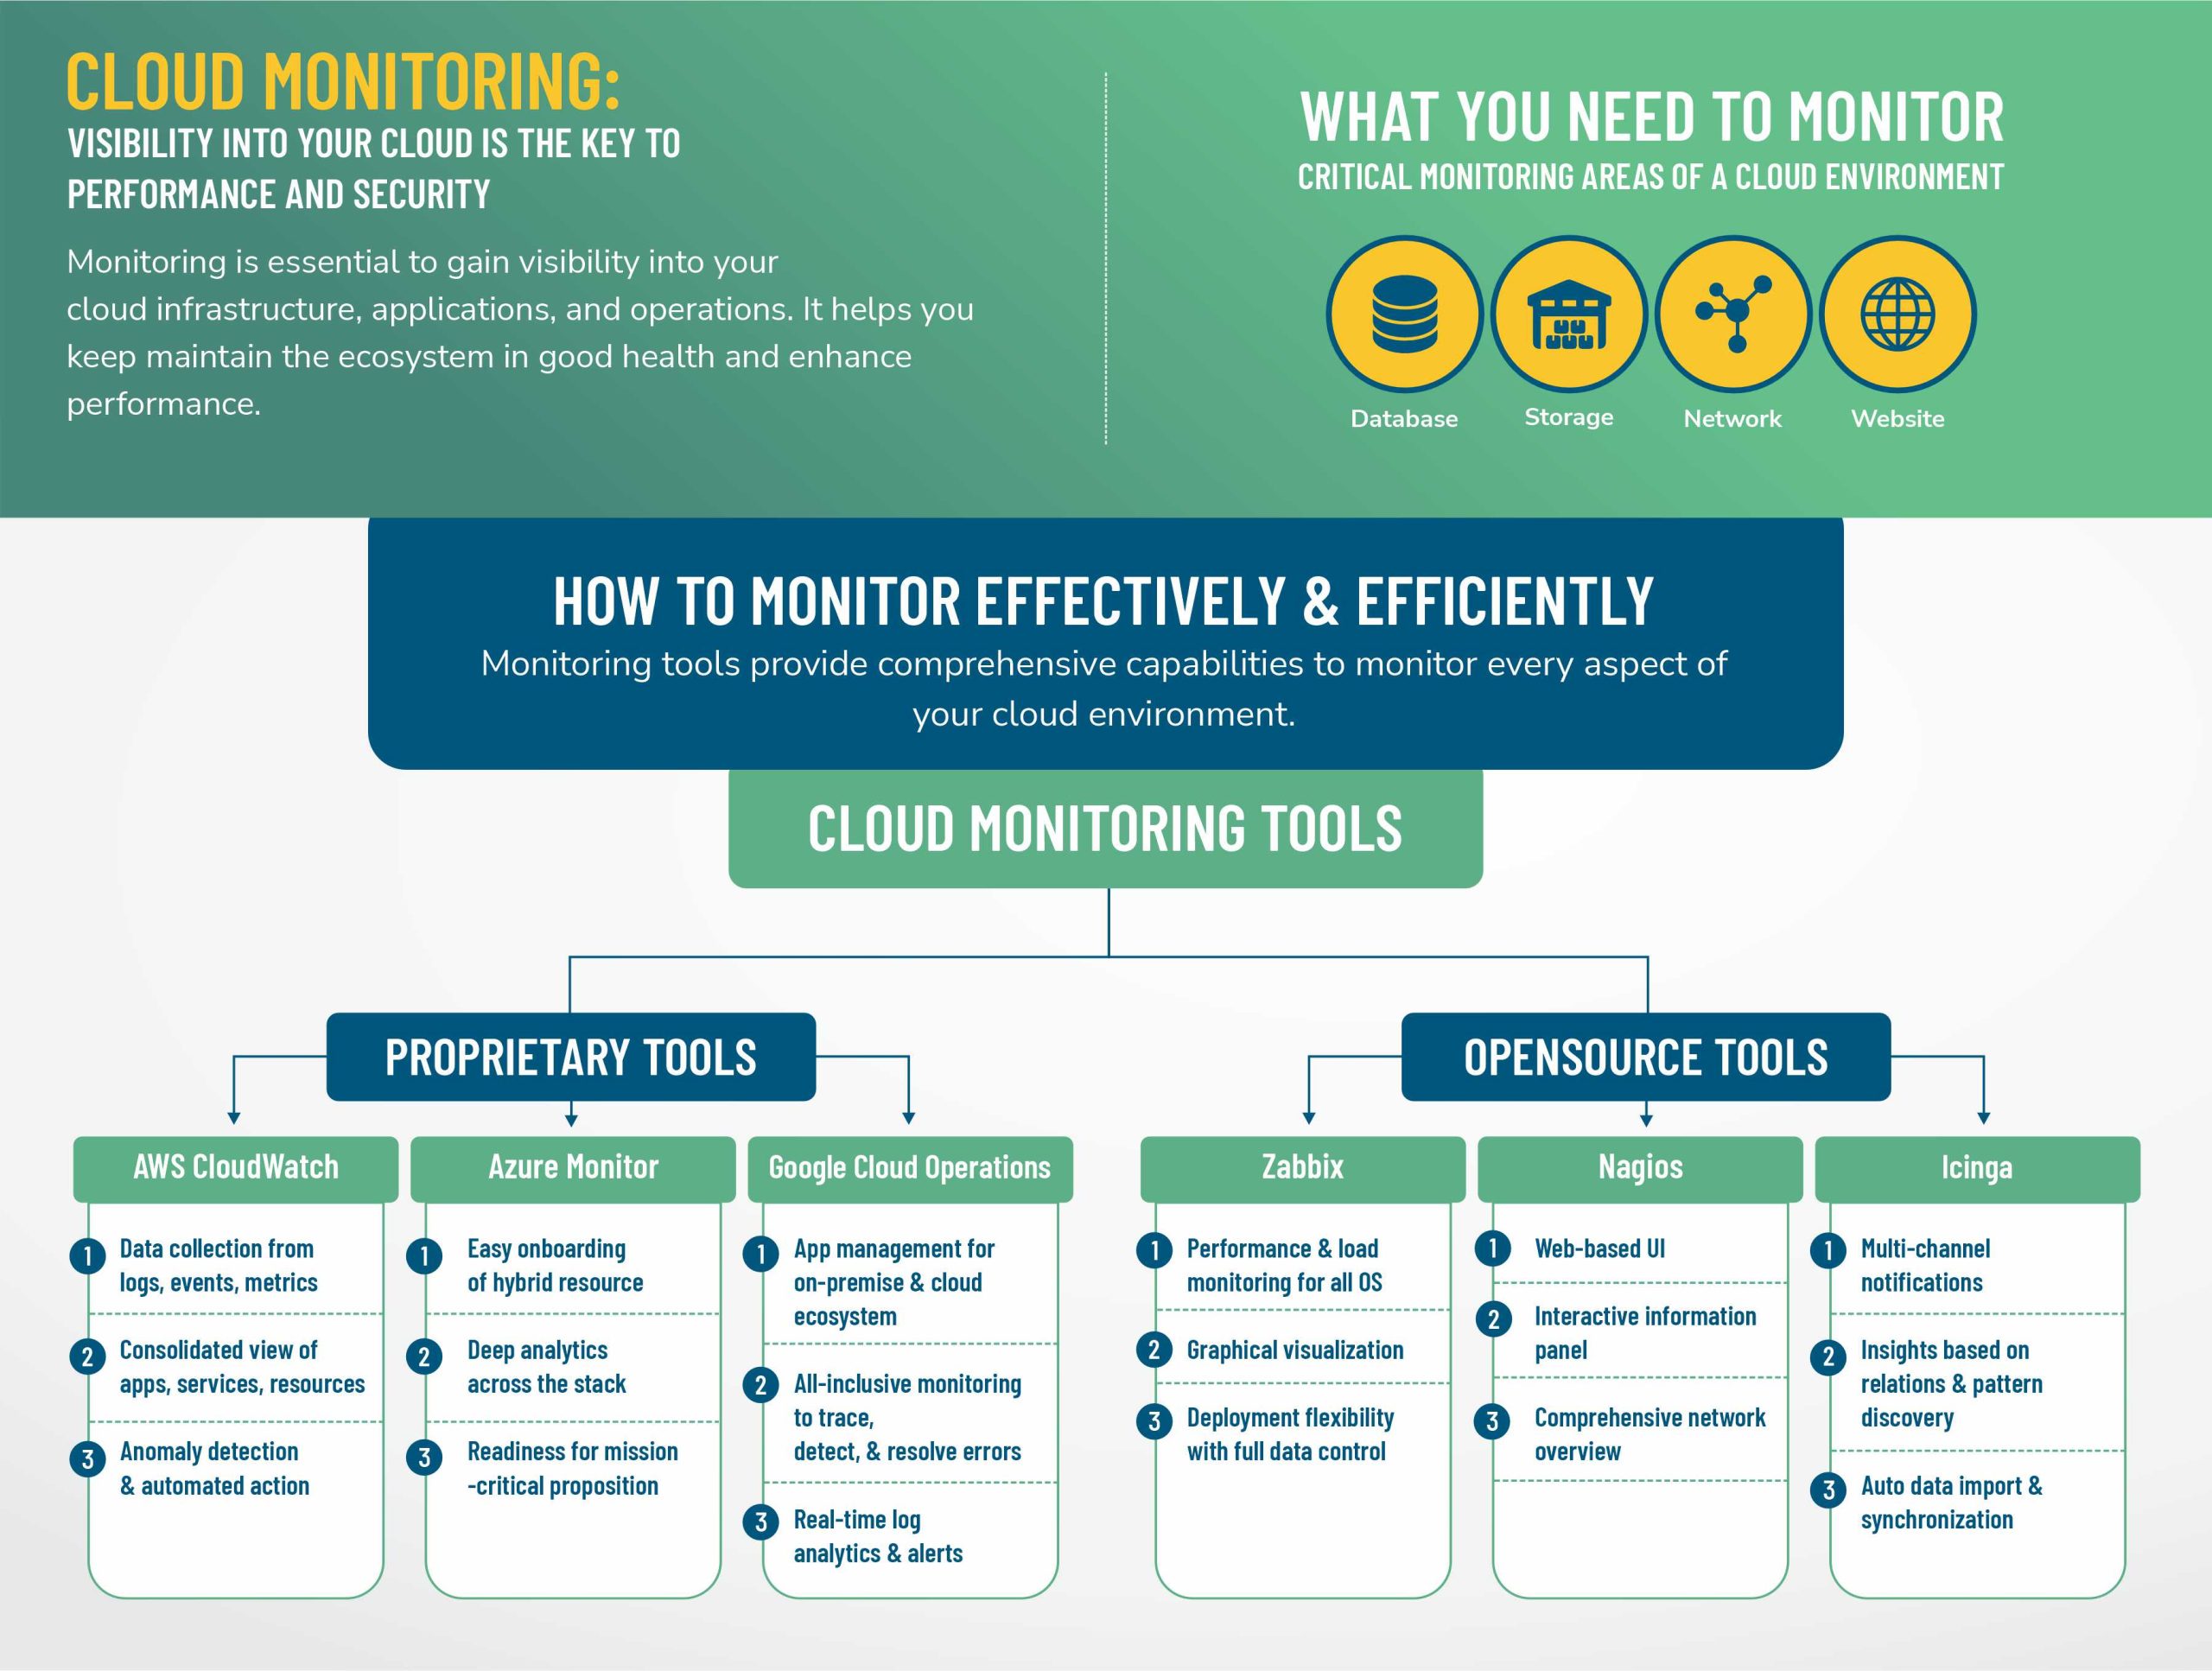 proprietary and open-source cloud monitoring tools